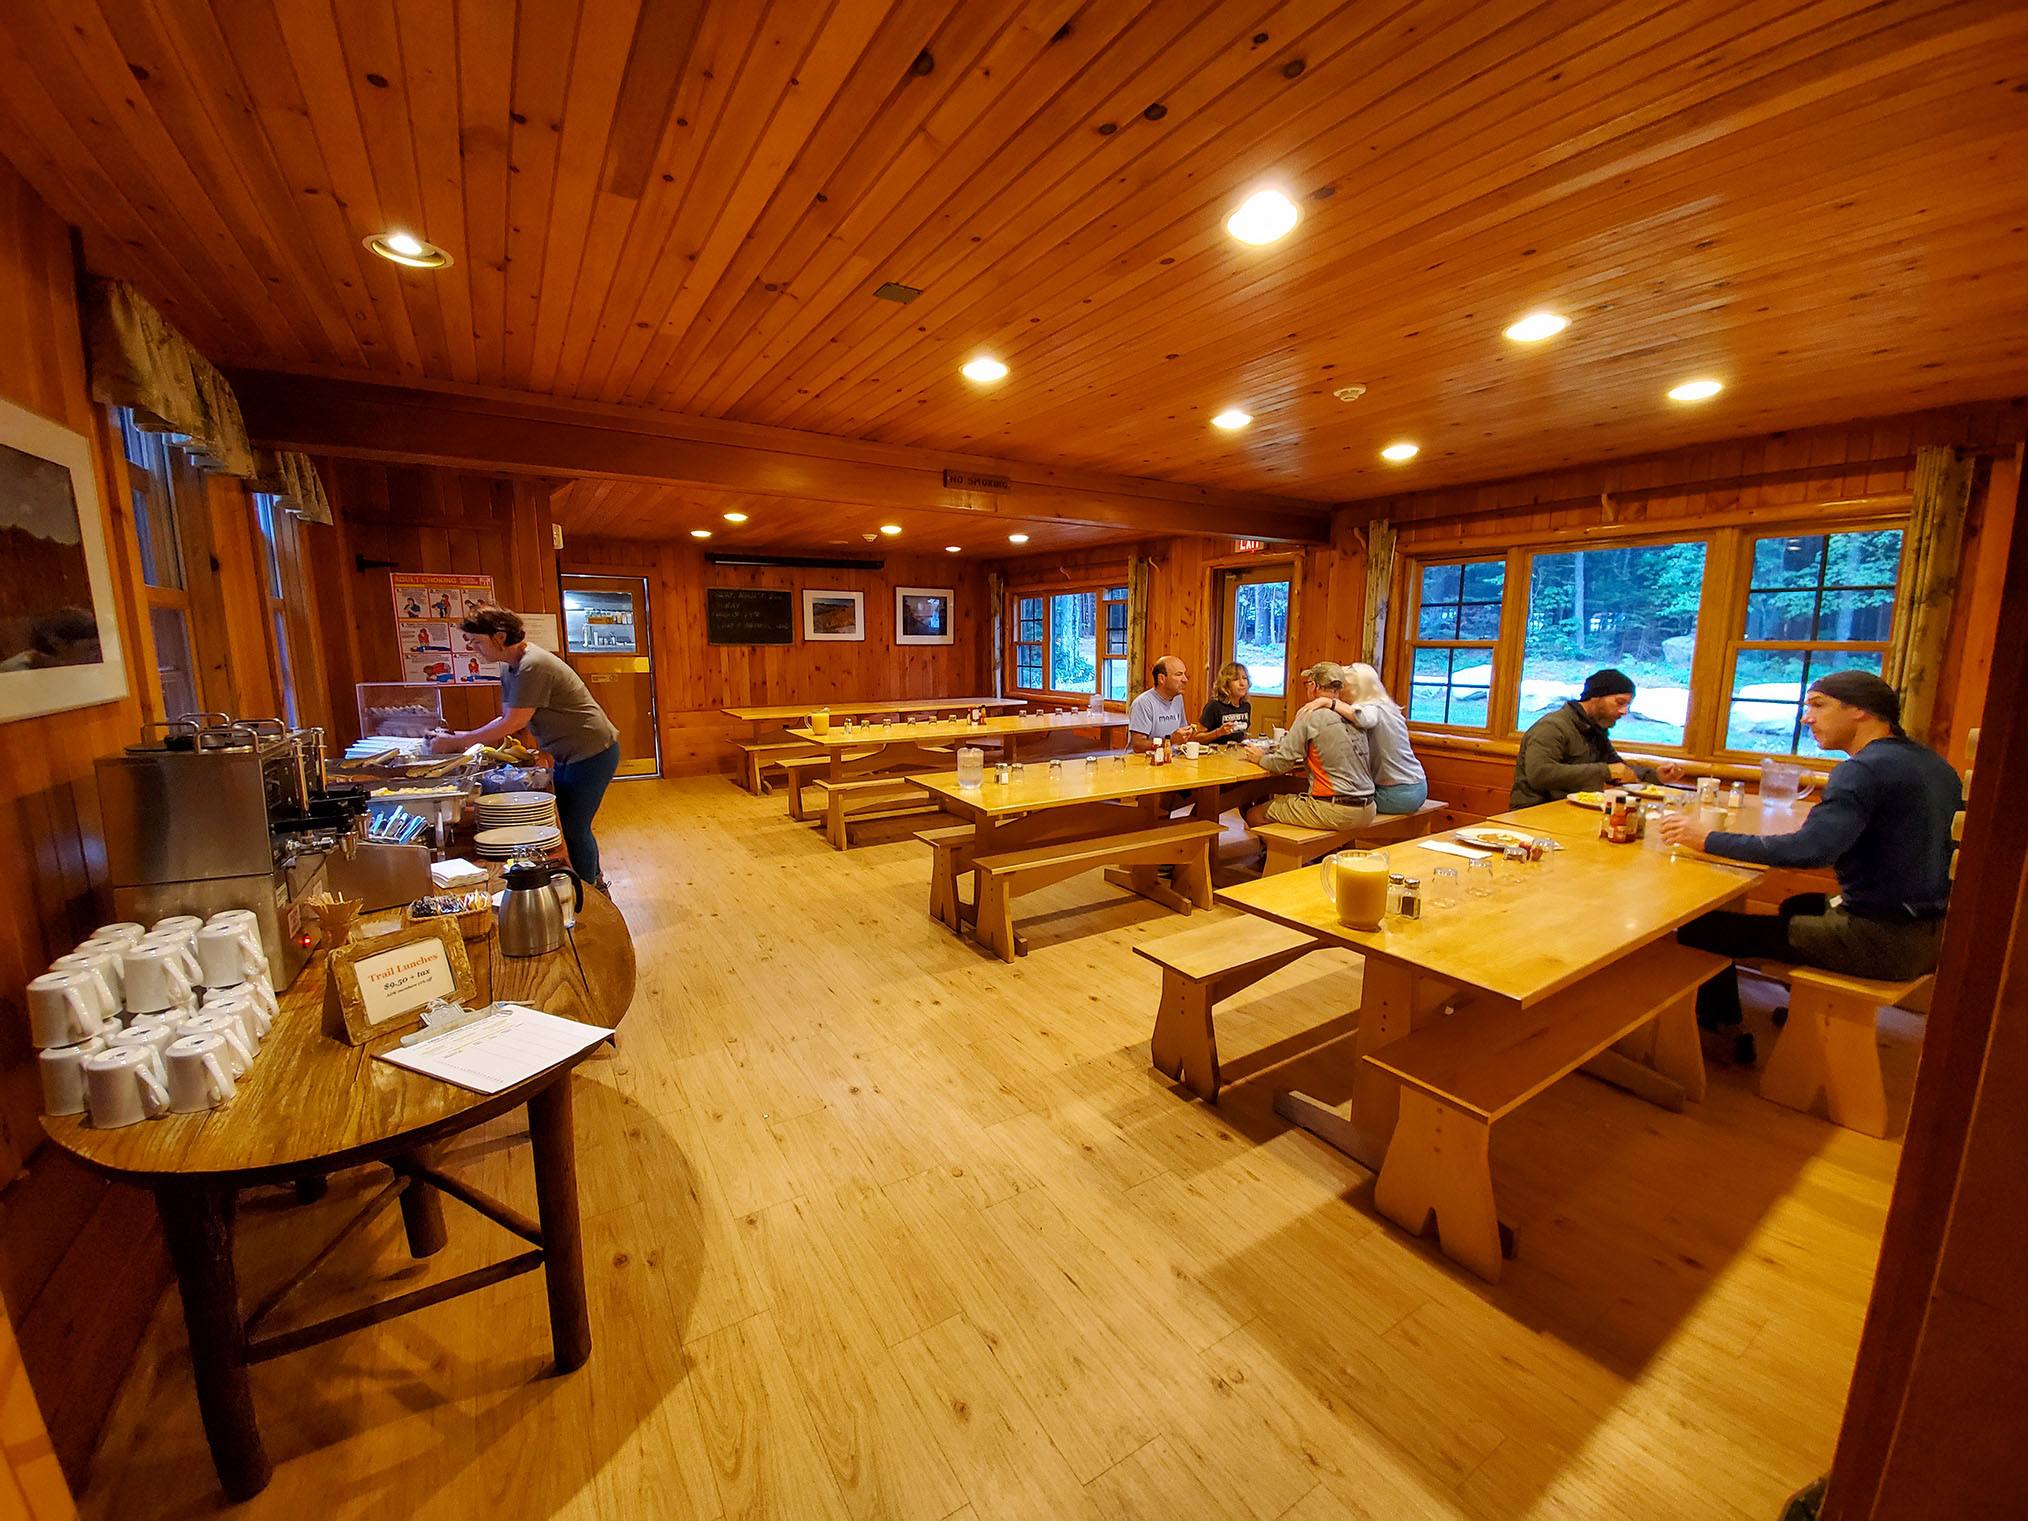 ADK Dining Room - Himalayan Institute